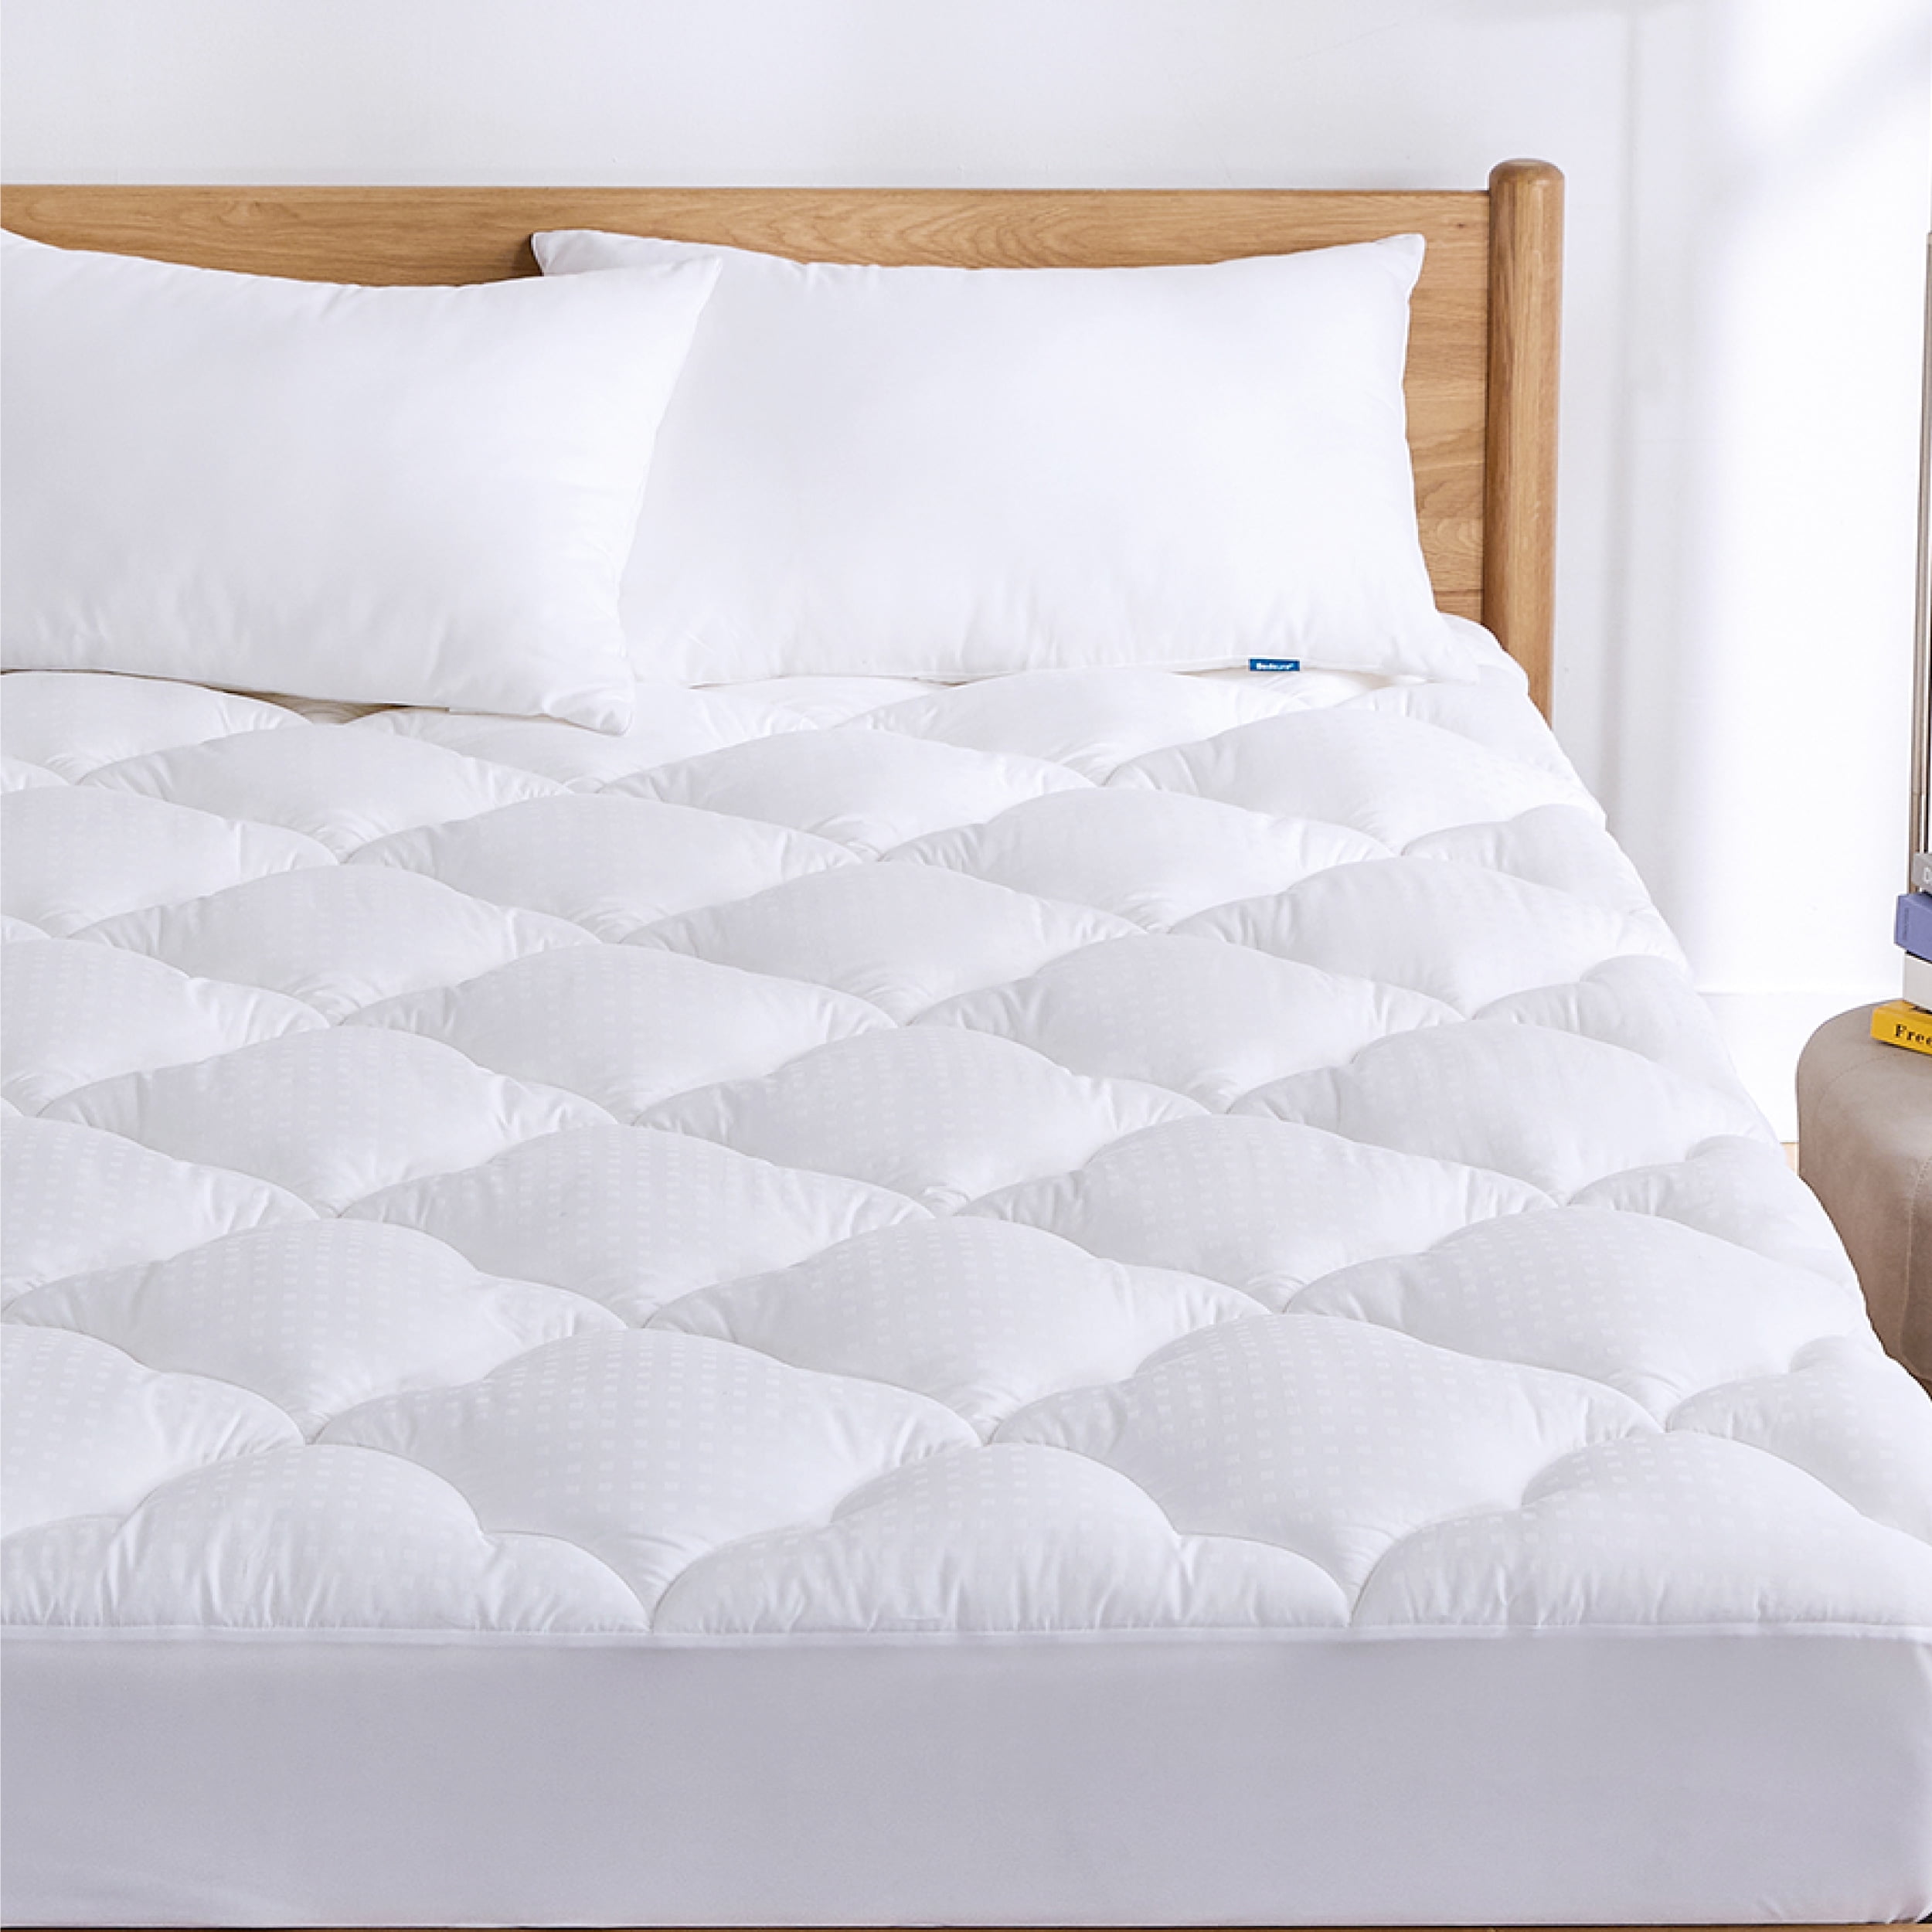 SOPAT Reversible Twin Size Quilted Mattress Pad Cover Topper Pillow Top Mattress  Protector with Fitted Deep Pocket 8-21, Cotton Fabric, Soft and  Comfortable (39 x 75) 